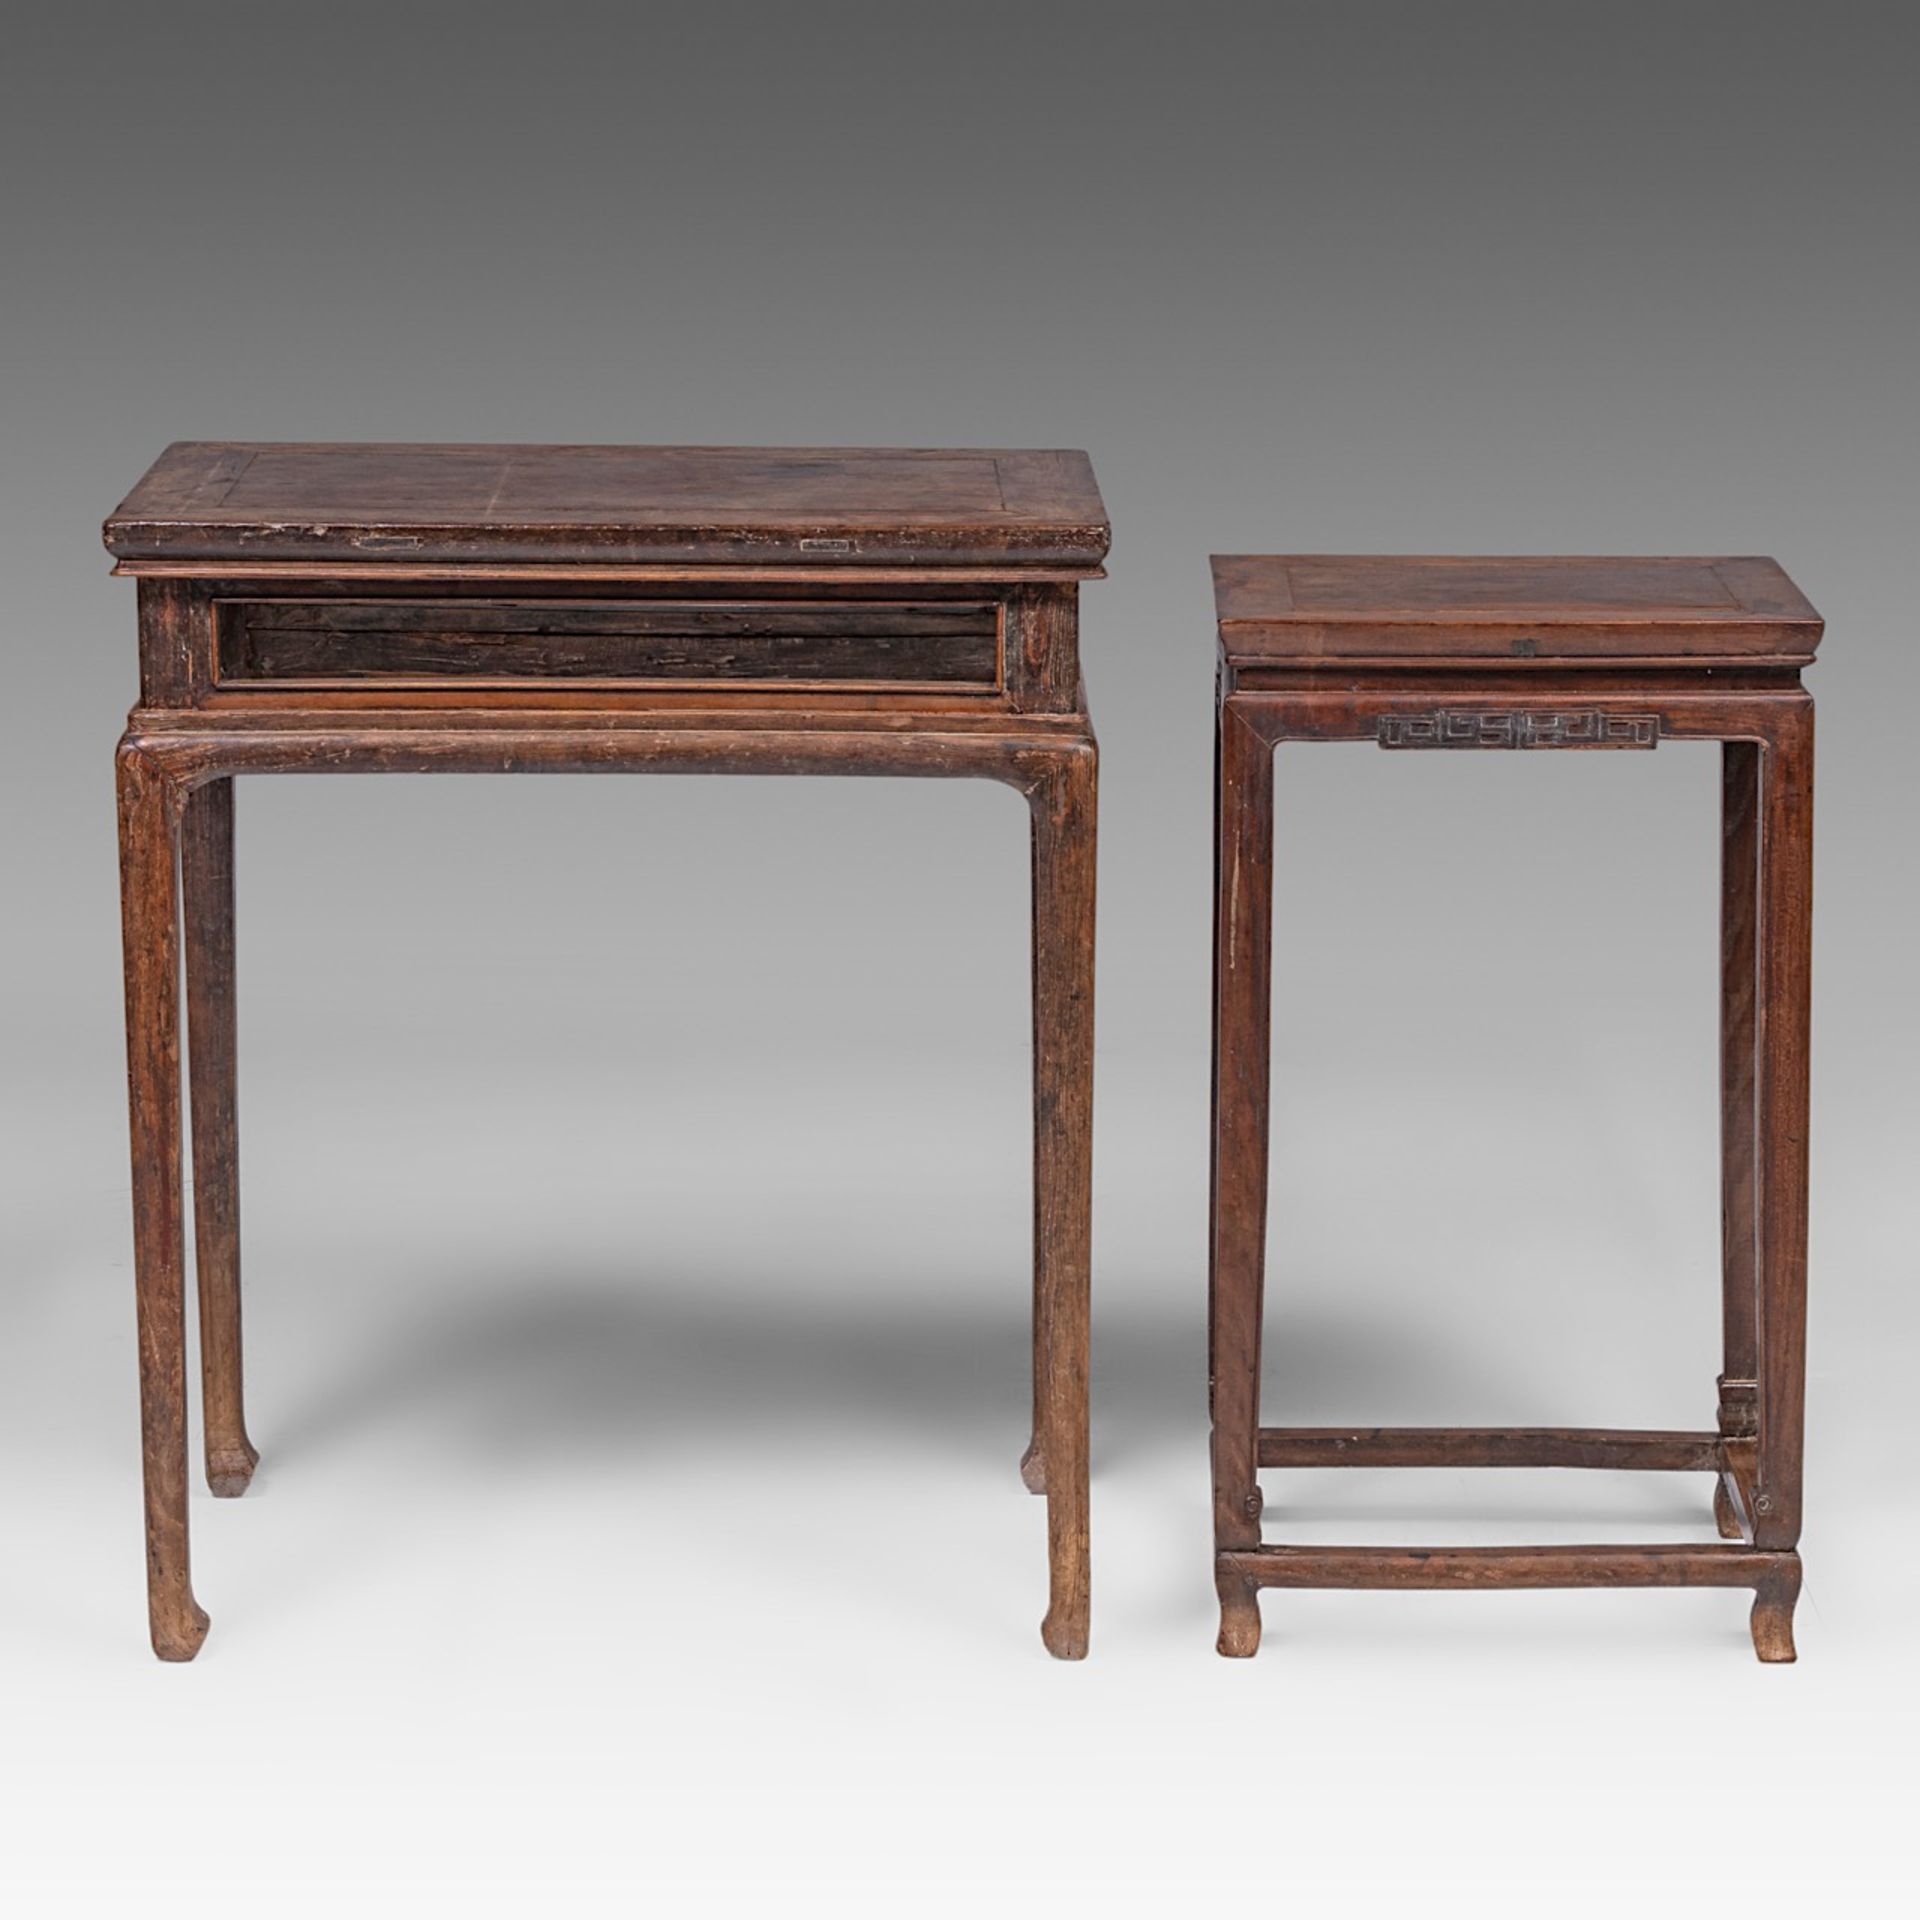 Two Chinese hardwood side tables, mid - late Qing dynasty, largest H 82 - 69 x 42 cm - Bild 4 aus 7